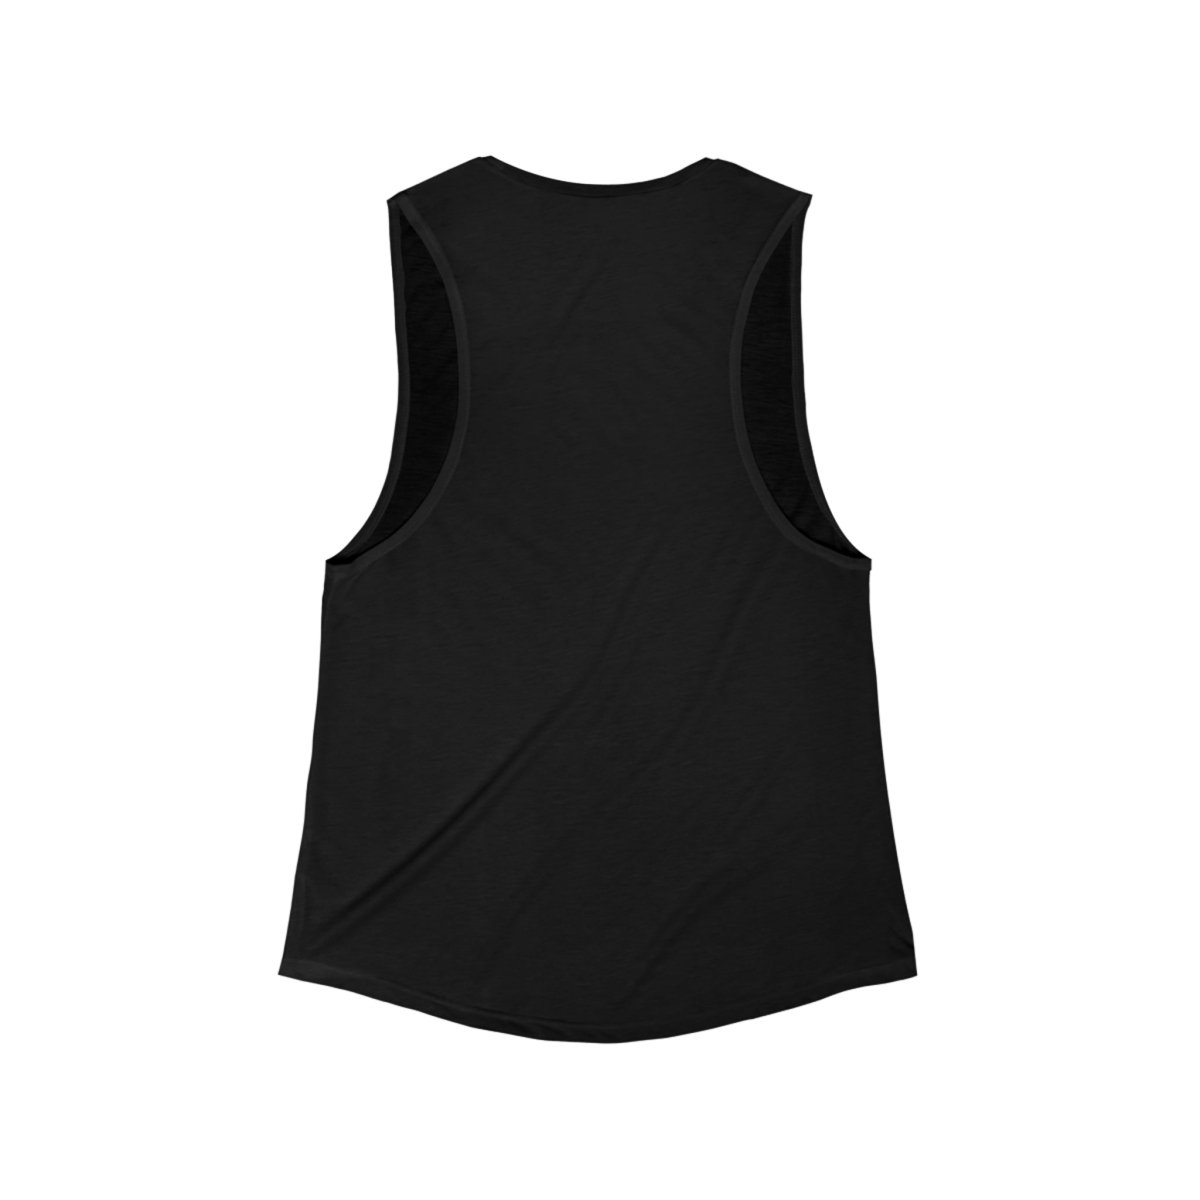 Cougar Forecast Women's Scoop Muscle Tank